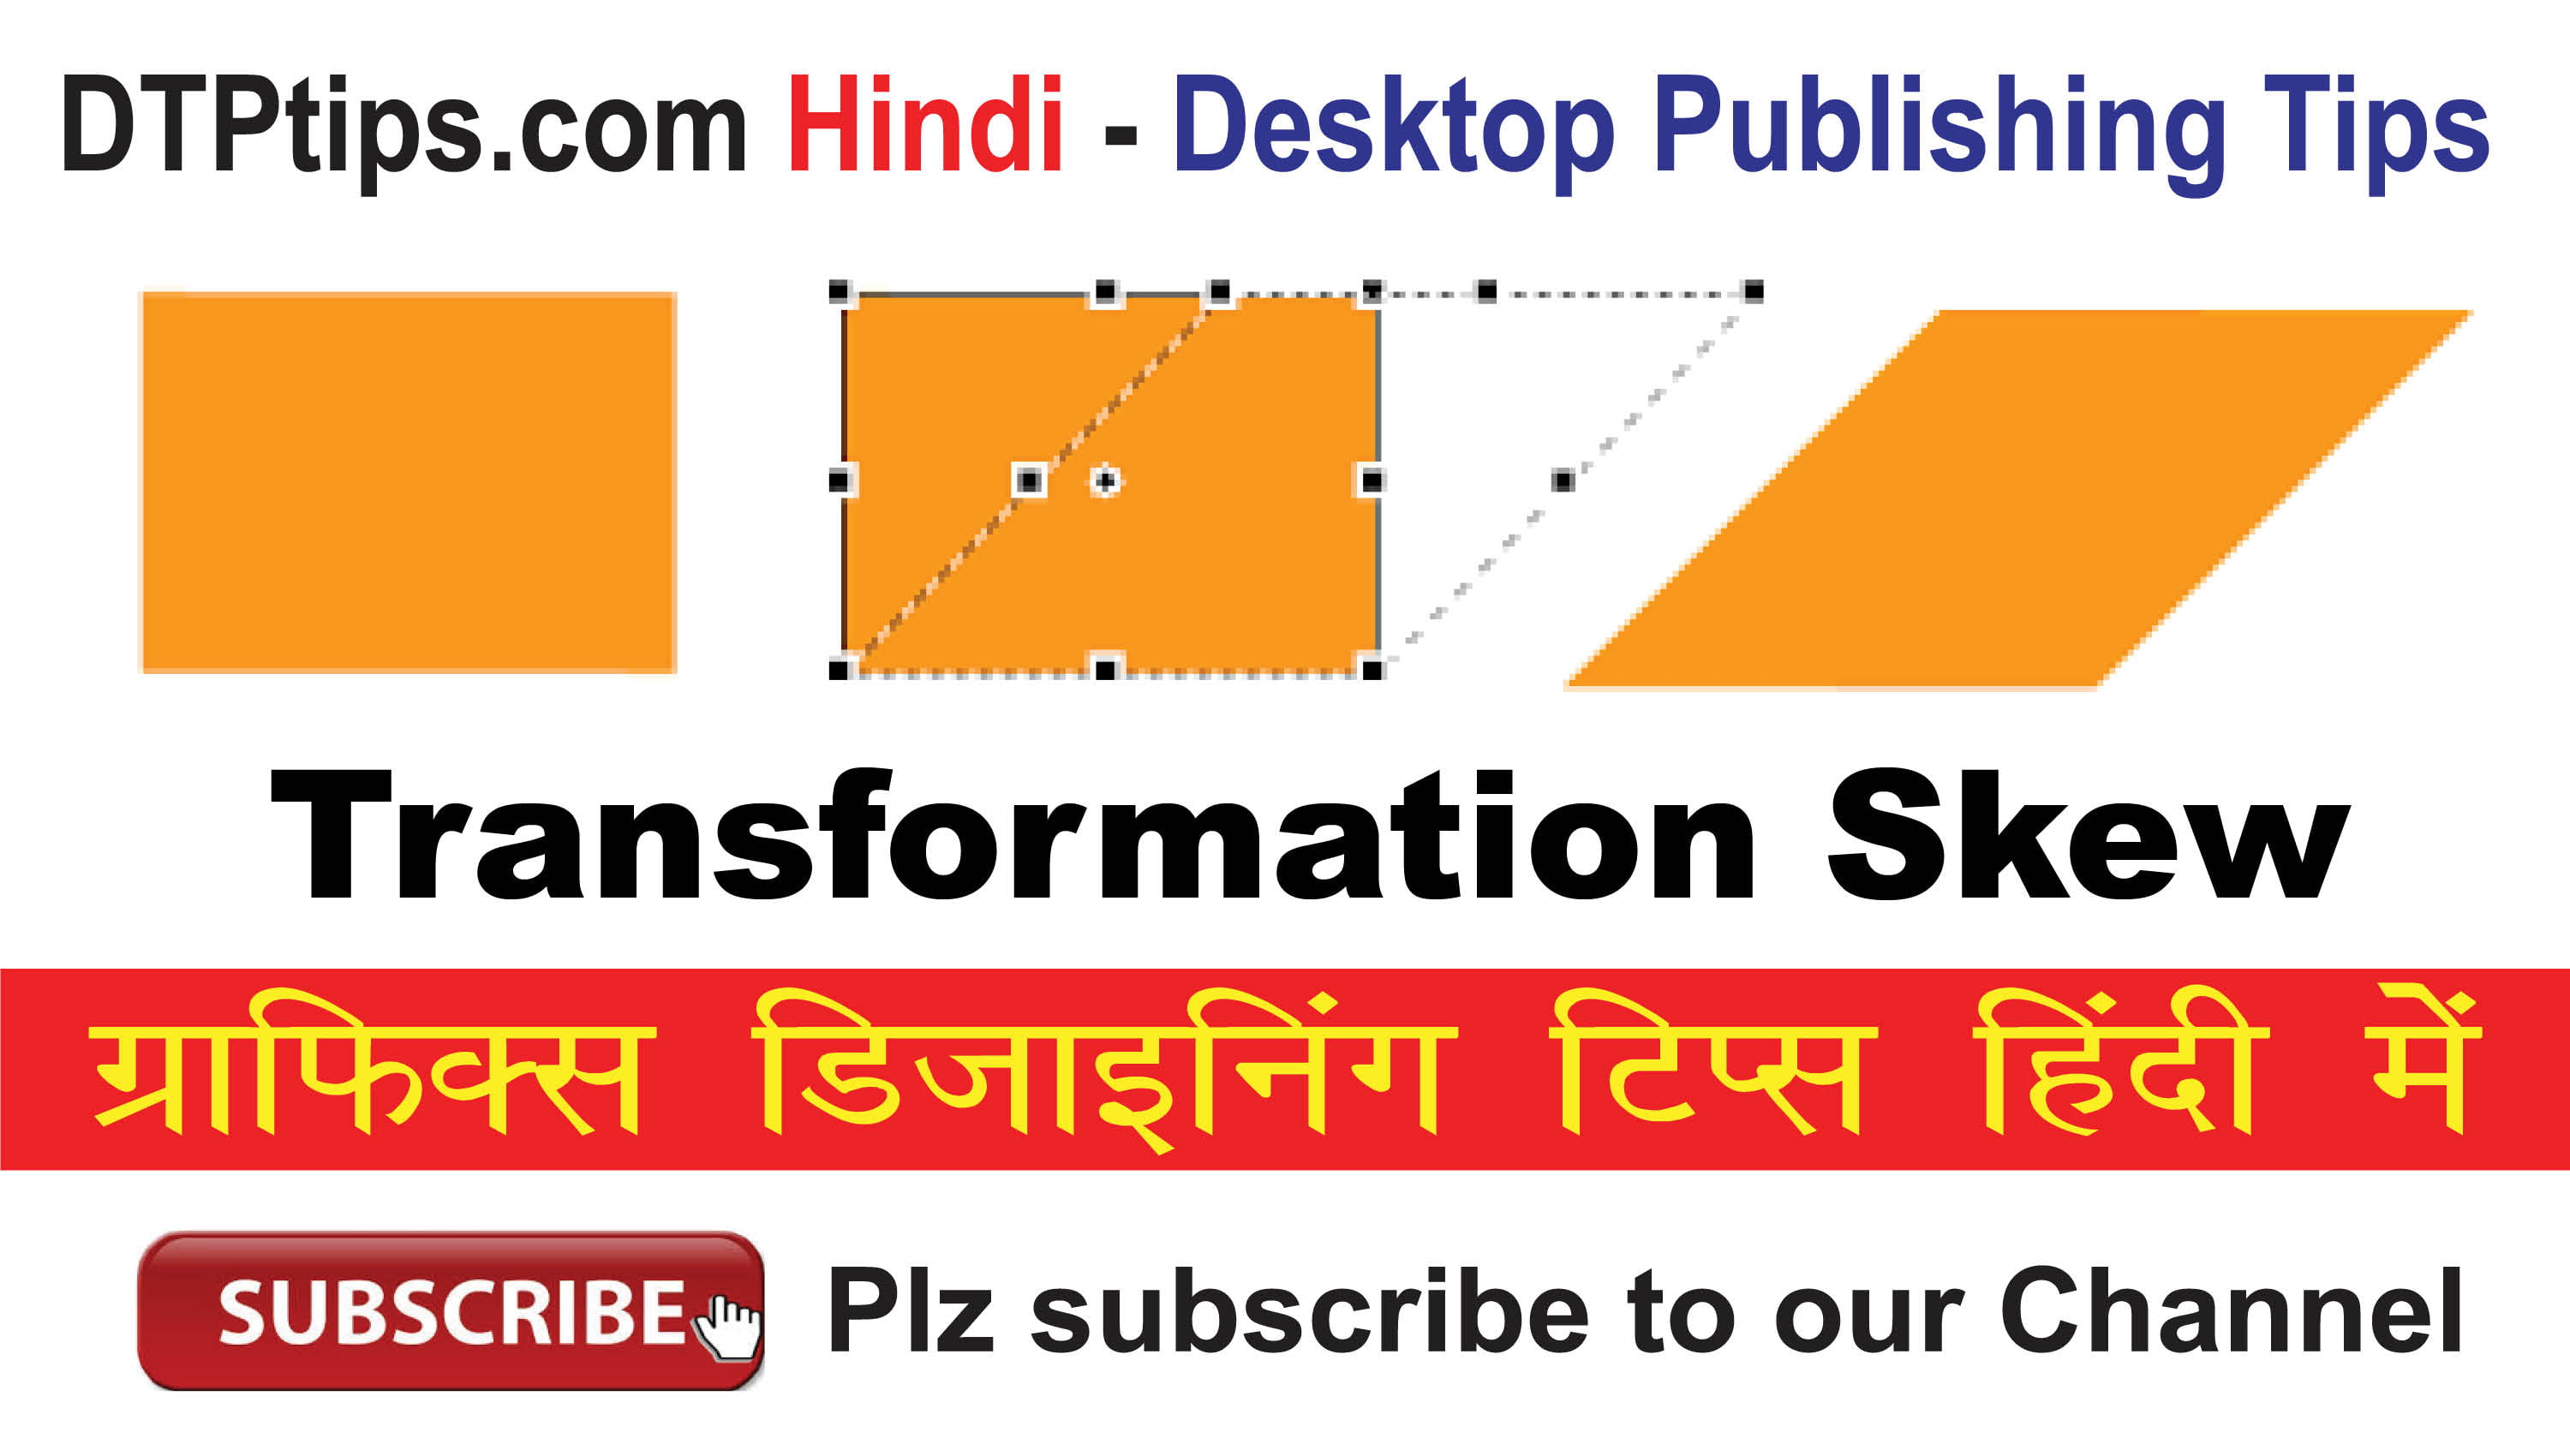 Skew and Transformation in Indesign: Learn Indesign in Hindi